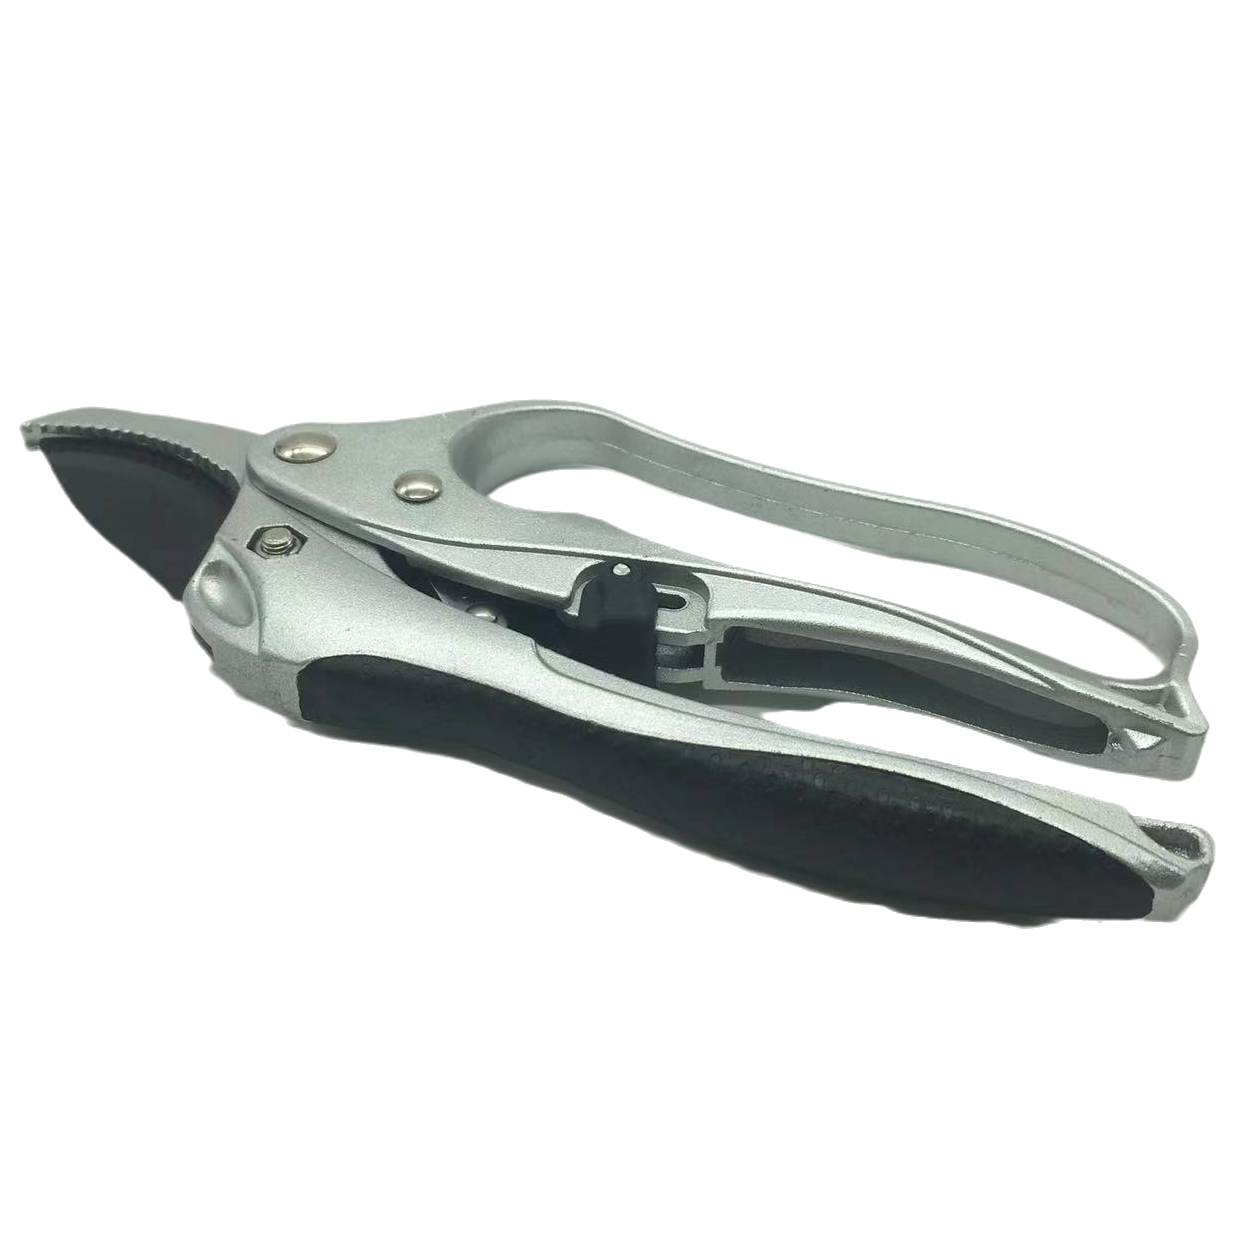 Garden Shears SK5 Blades Silver Garden Tools Labor-saving Tree Branches And Flower Branches High-carbon Steel Shears